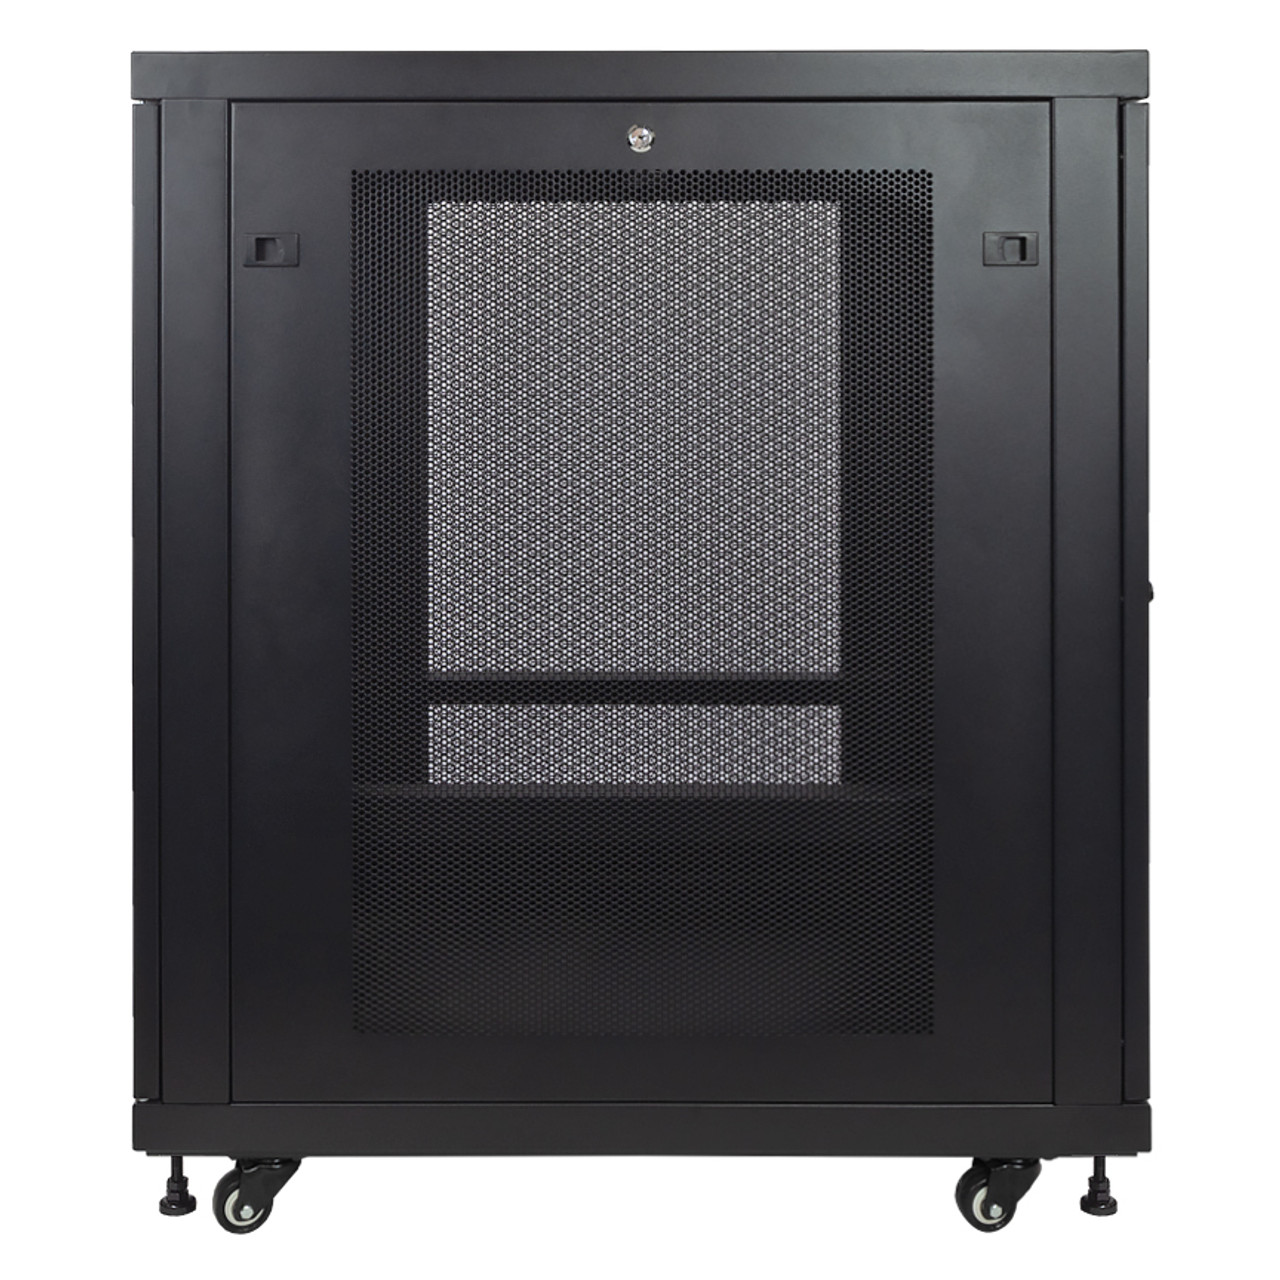 NavePoint 18U 838mm Mid Depth Perforated Networking Cabinet